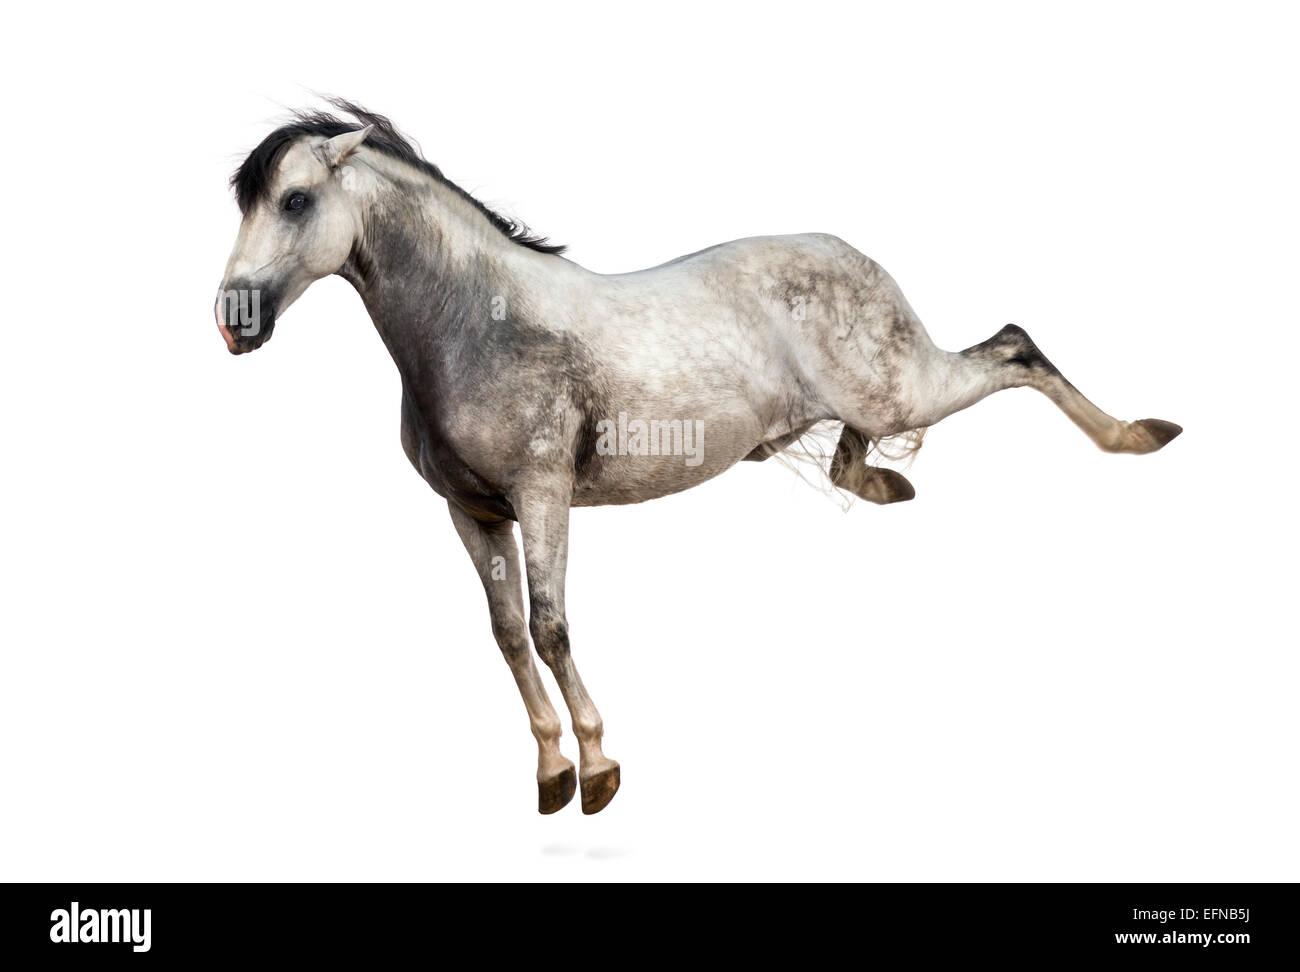 Andalusian horse kicking out against white background Stock Photo